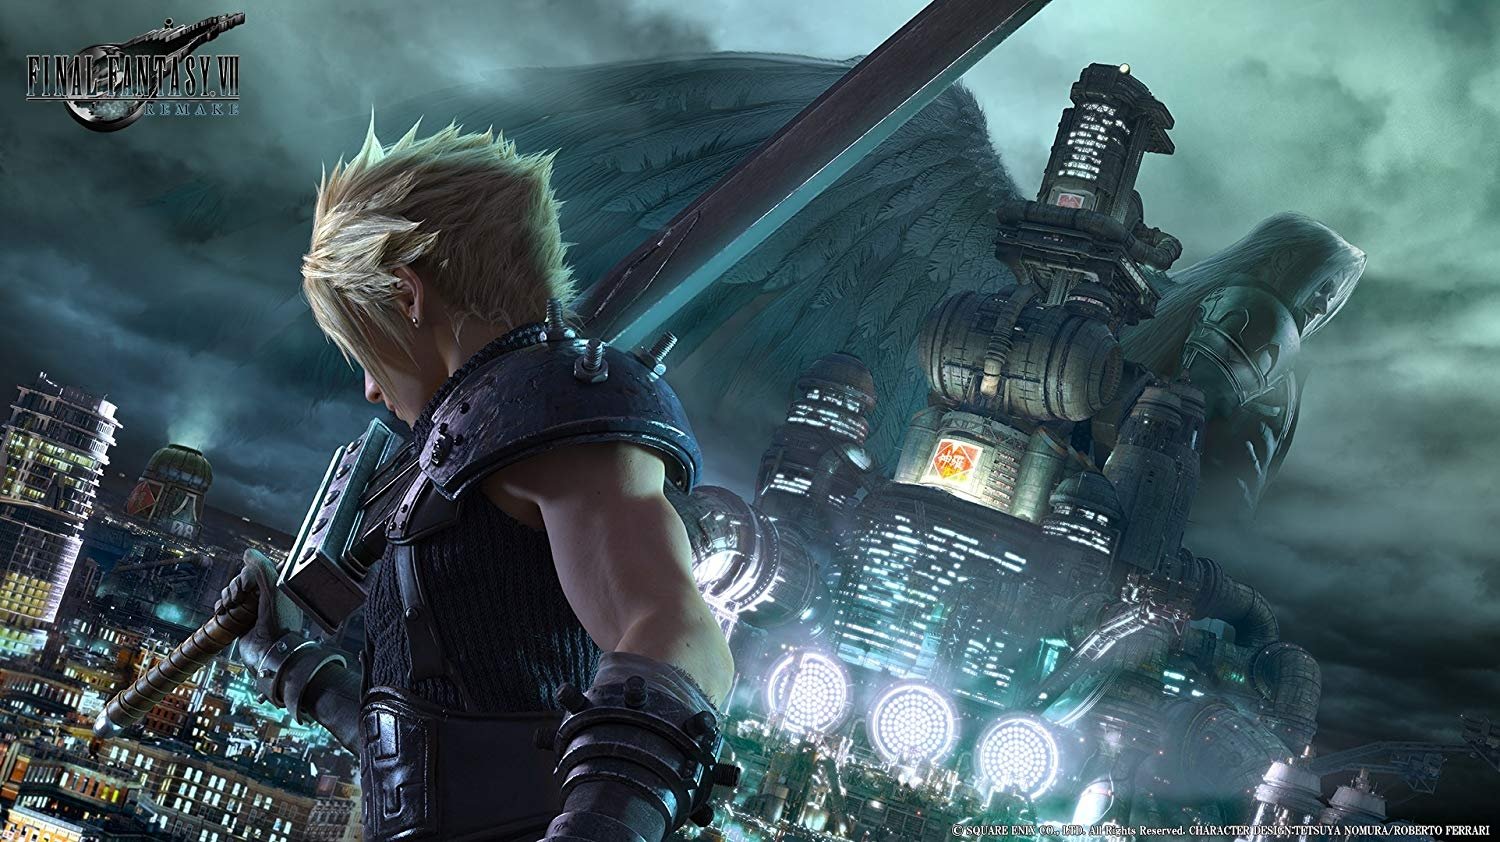 Final Fantasy 7 Remake part 2 may release on PlayStation 5